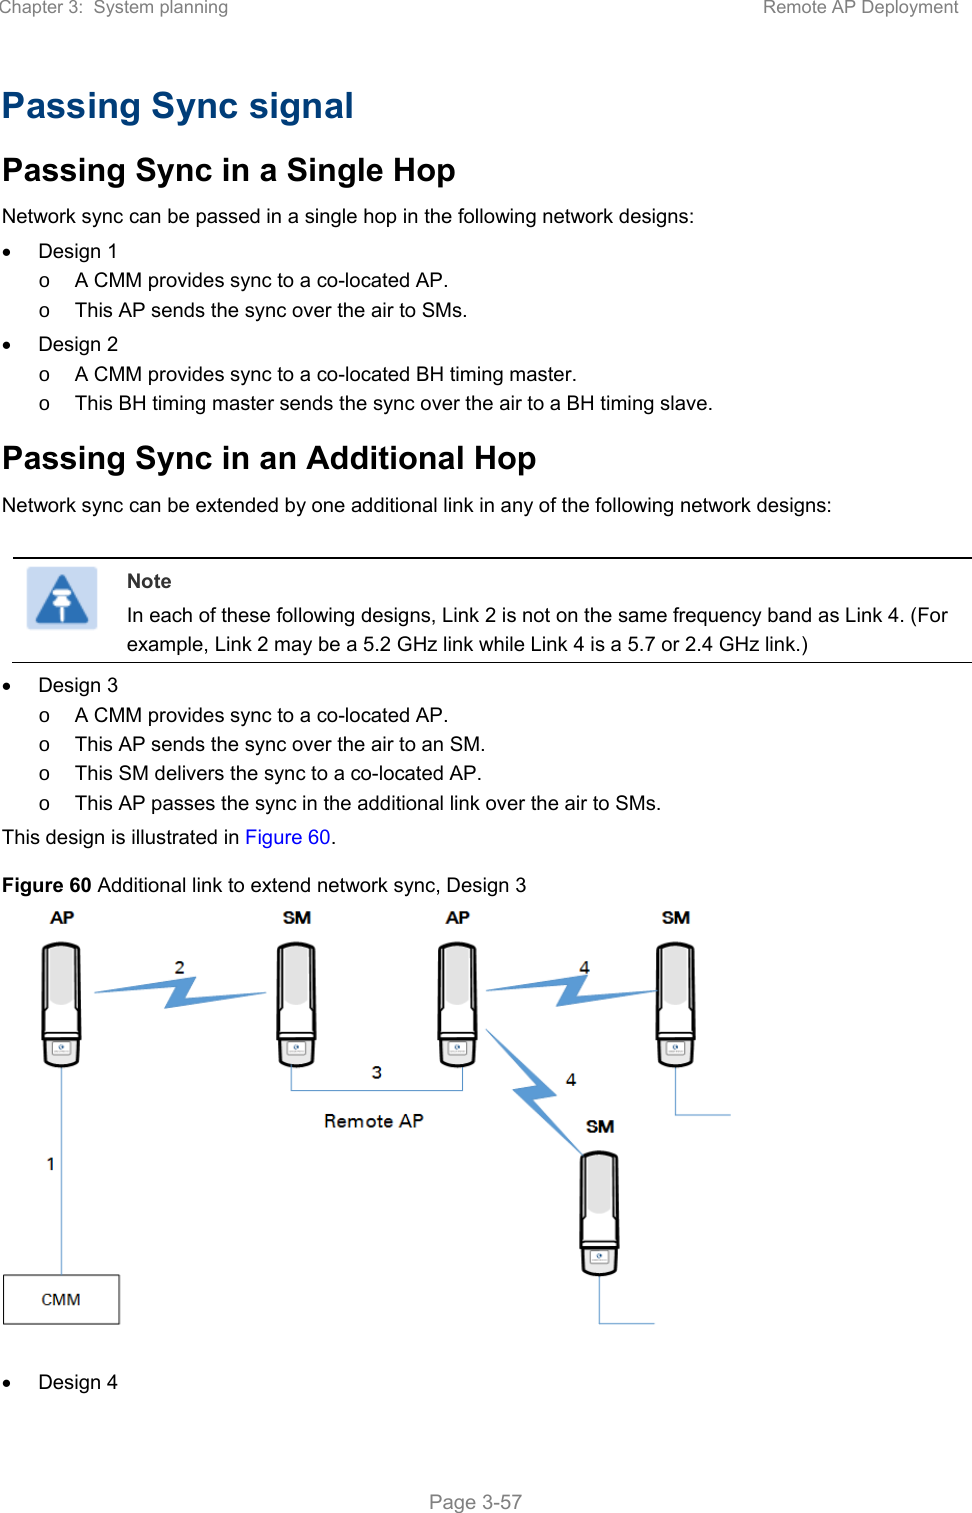 Chapter 3:  System planning  Remote AP Deployment   Page 3-57 Passing Sync signal Passing Sync in a Single Hop Network sync can be passed in a single hop in the following network designs:   Design 1 o  A CMM provides sync to a co-located AP. o  This AP sends the sync over the air to SMs.   Design 2 o  A CMM provides sync to a co-located BH timing master. o  This BH timing master sends the sync over the air to a BH timing slave. Passing Sync in an Additional Hop Network sync can be extended by one additional link in any of the following network designs:   Note In each of these following designs, Link 2 is not on the same frequency band as Link 4. (For example, Link 2 may be a 5.2 GHz link while Link 4 is a 5.7 or 2.4 GHz link.)   Design 3 o  A CMM provides sync to a co-located AP. o  This AP sends the sync over the air to an SM. o  This SM delivers the sync to a co-located AP. o  This AP passes the sync in the additional link over the air to SMs. This design is illustrated in Figure 60. Figure 60 Additional link to extend network sync, Design 3     Design 4 